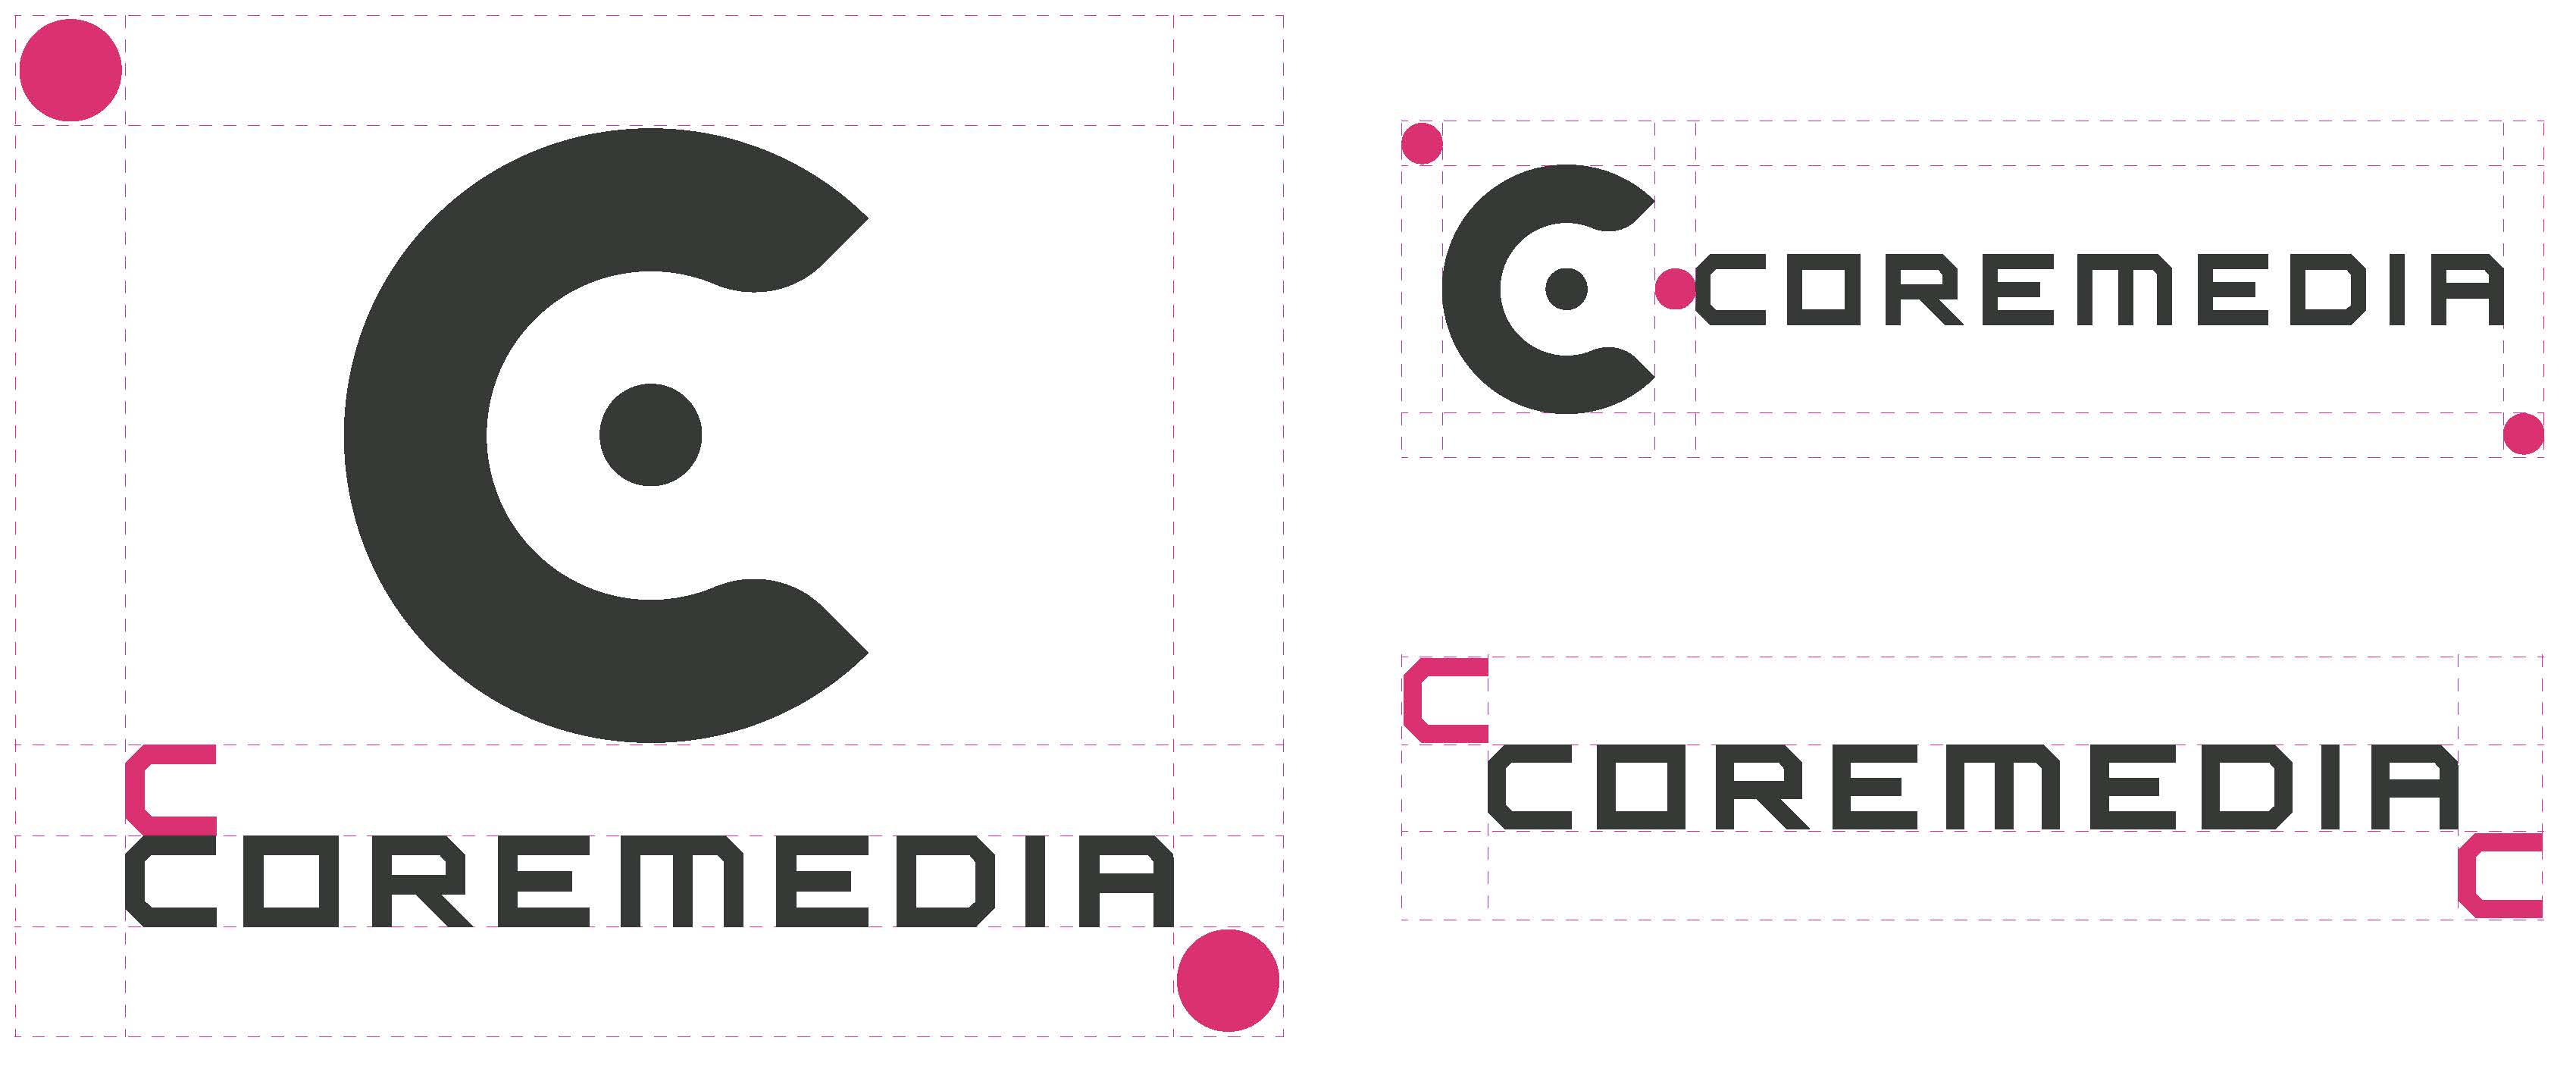 CoreMedia logo clearspace exemples